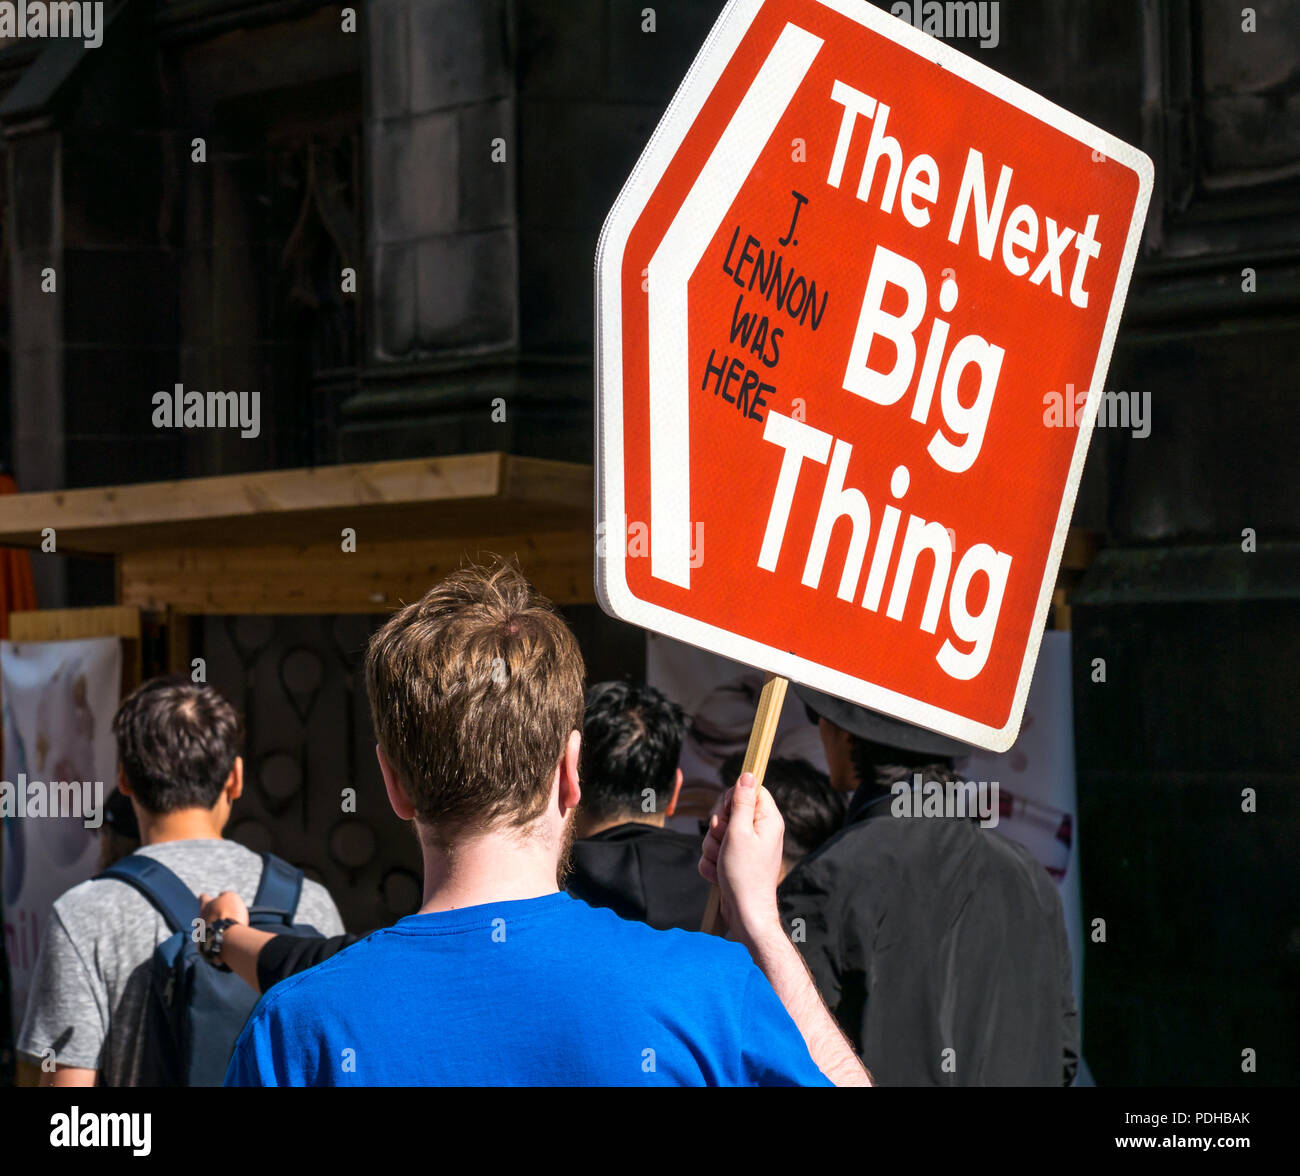 Edinburgh, Scotland, UK. 9th August 2018. Edinburgh Fringe Festival, Royal Mile, Edinburgh, Scotland, United Kingdom. On a sunny festival day the Virgin Money sponsored street festival is packed with people and fringe performers. A man holding an arrow sign saying The Next Big Thing Stock Photo